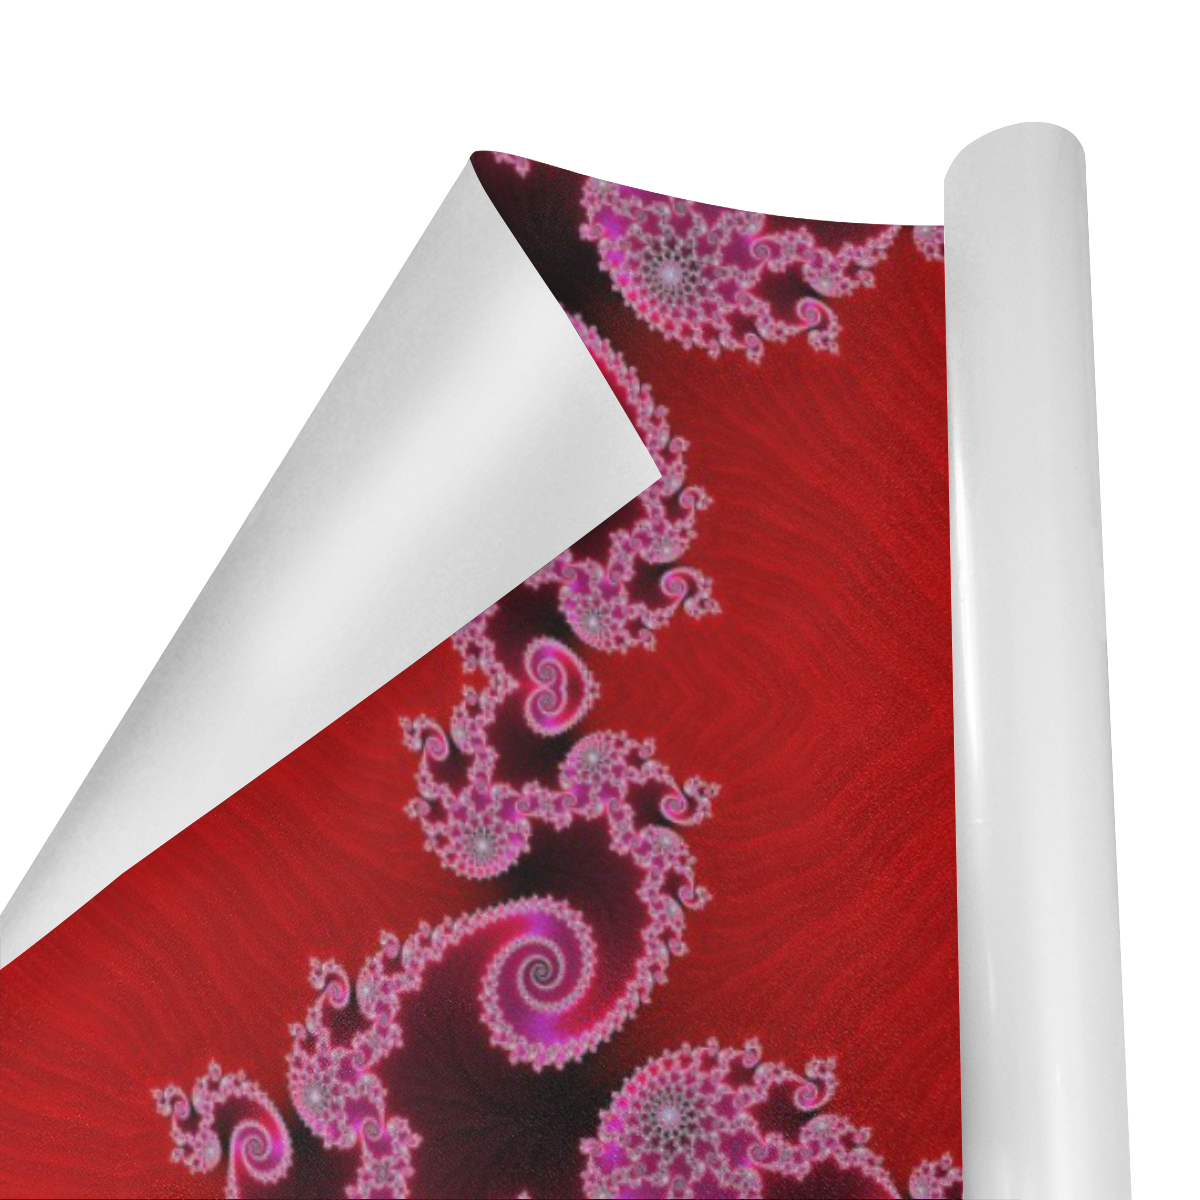 Red Pink Mauve Hearts and Lace Fractal Abstract 2 Gift Wrapping Paper 58"x 23" (1 Roll)